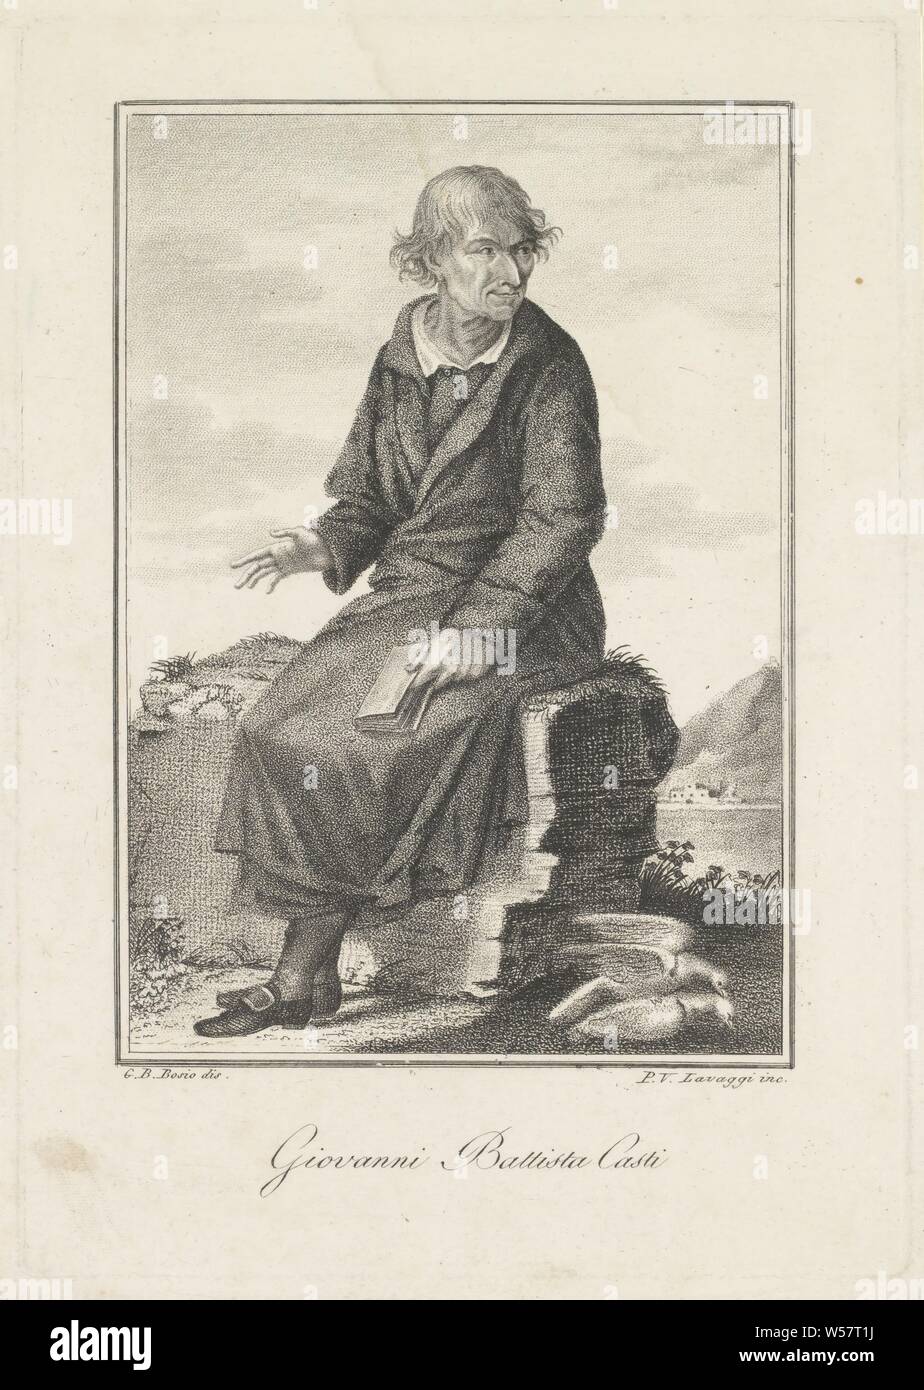 Portrait of poet Giovanni Battista Casti in a landscape, historical persons, portrait of a writer, writer, poet, author, Giovanni Battista Casti, P.V. Lavaggi (mentioned on object), Italy, 1800 - 1899, paper, etching, h 220 mm × w 156 mm Stock Photo